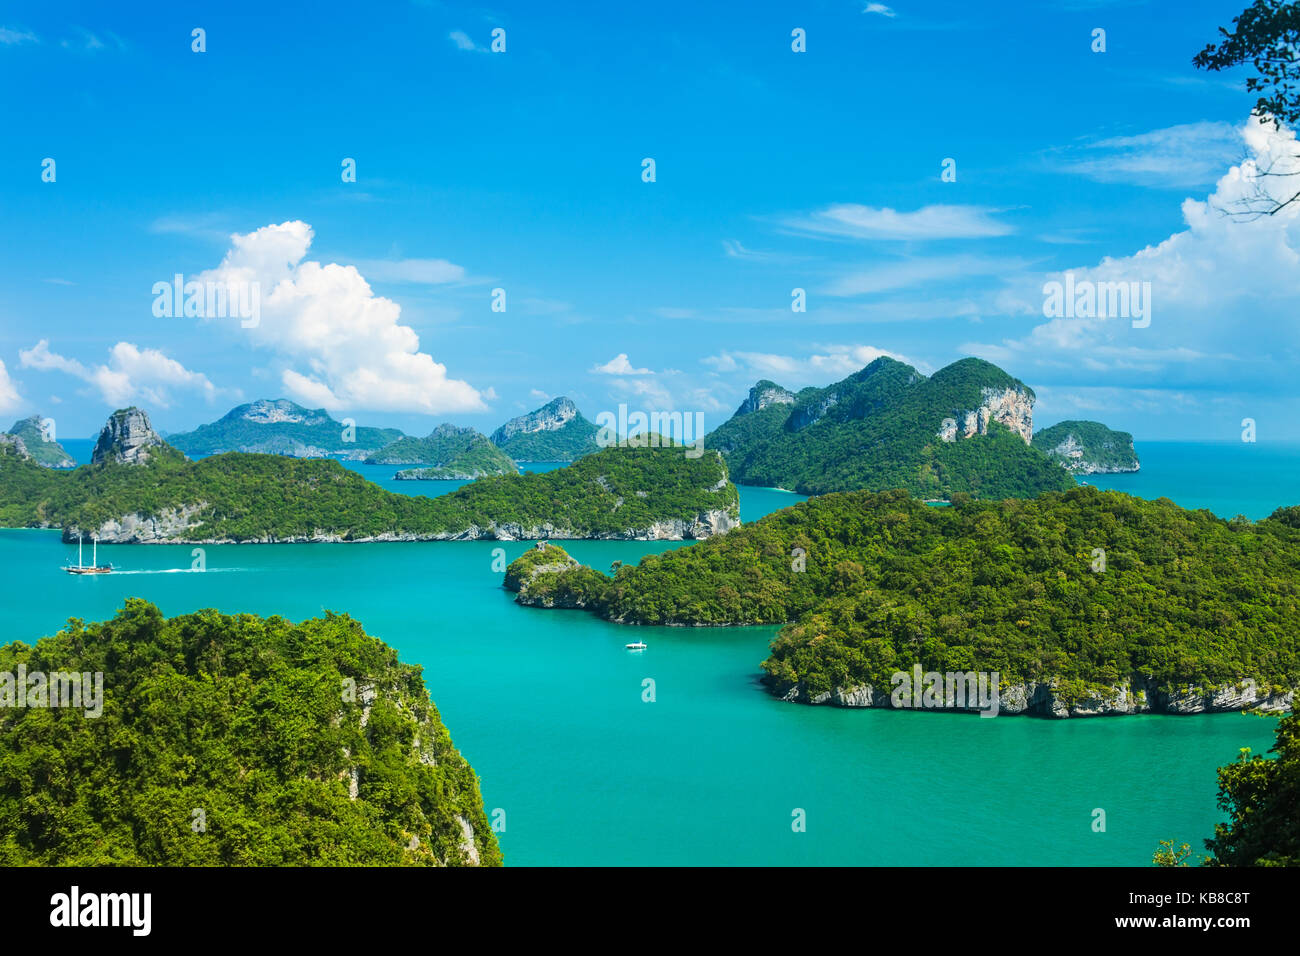 Tropical group of islands in Ang Thong National Marine Park, Thailand. Top view Stock Photo